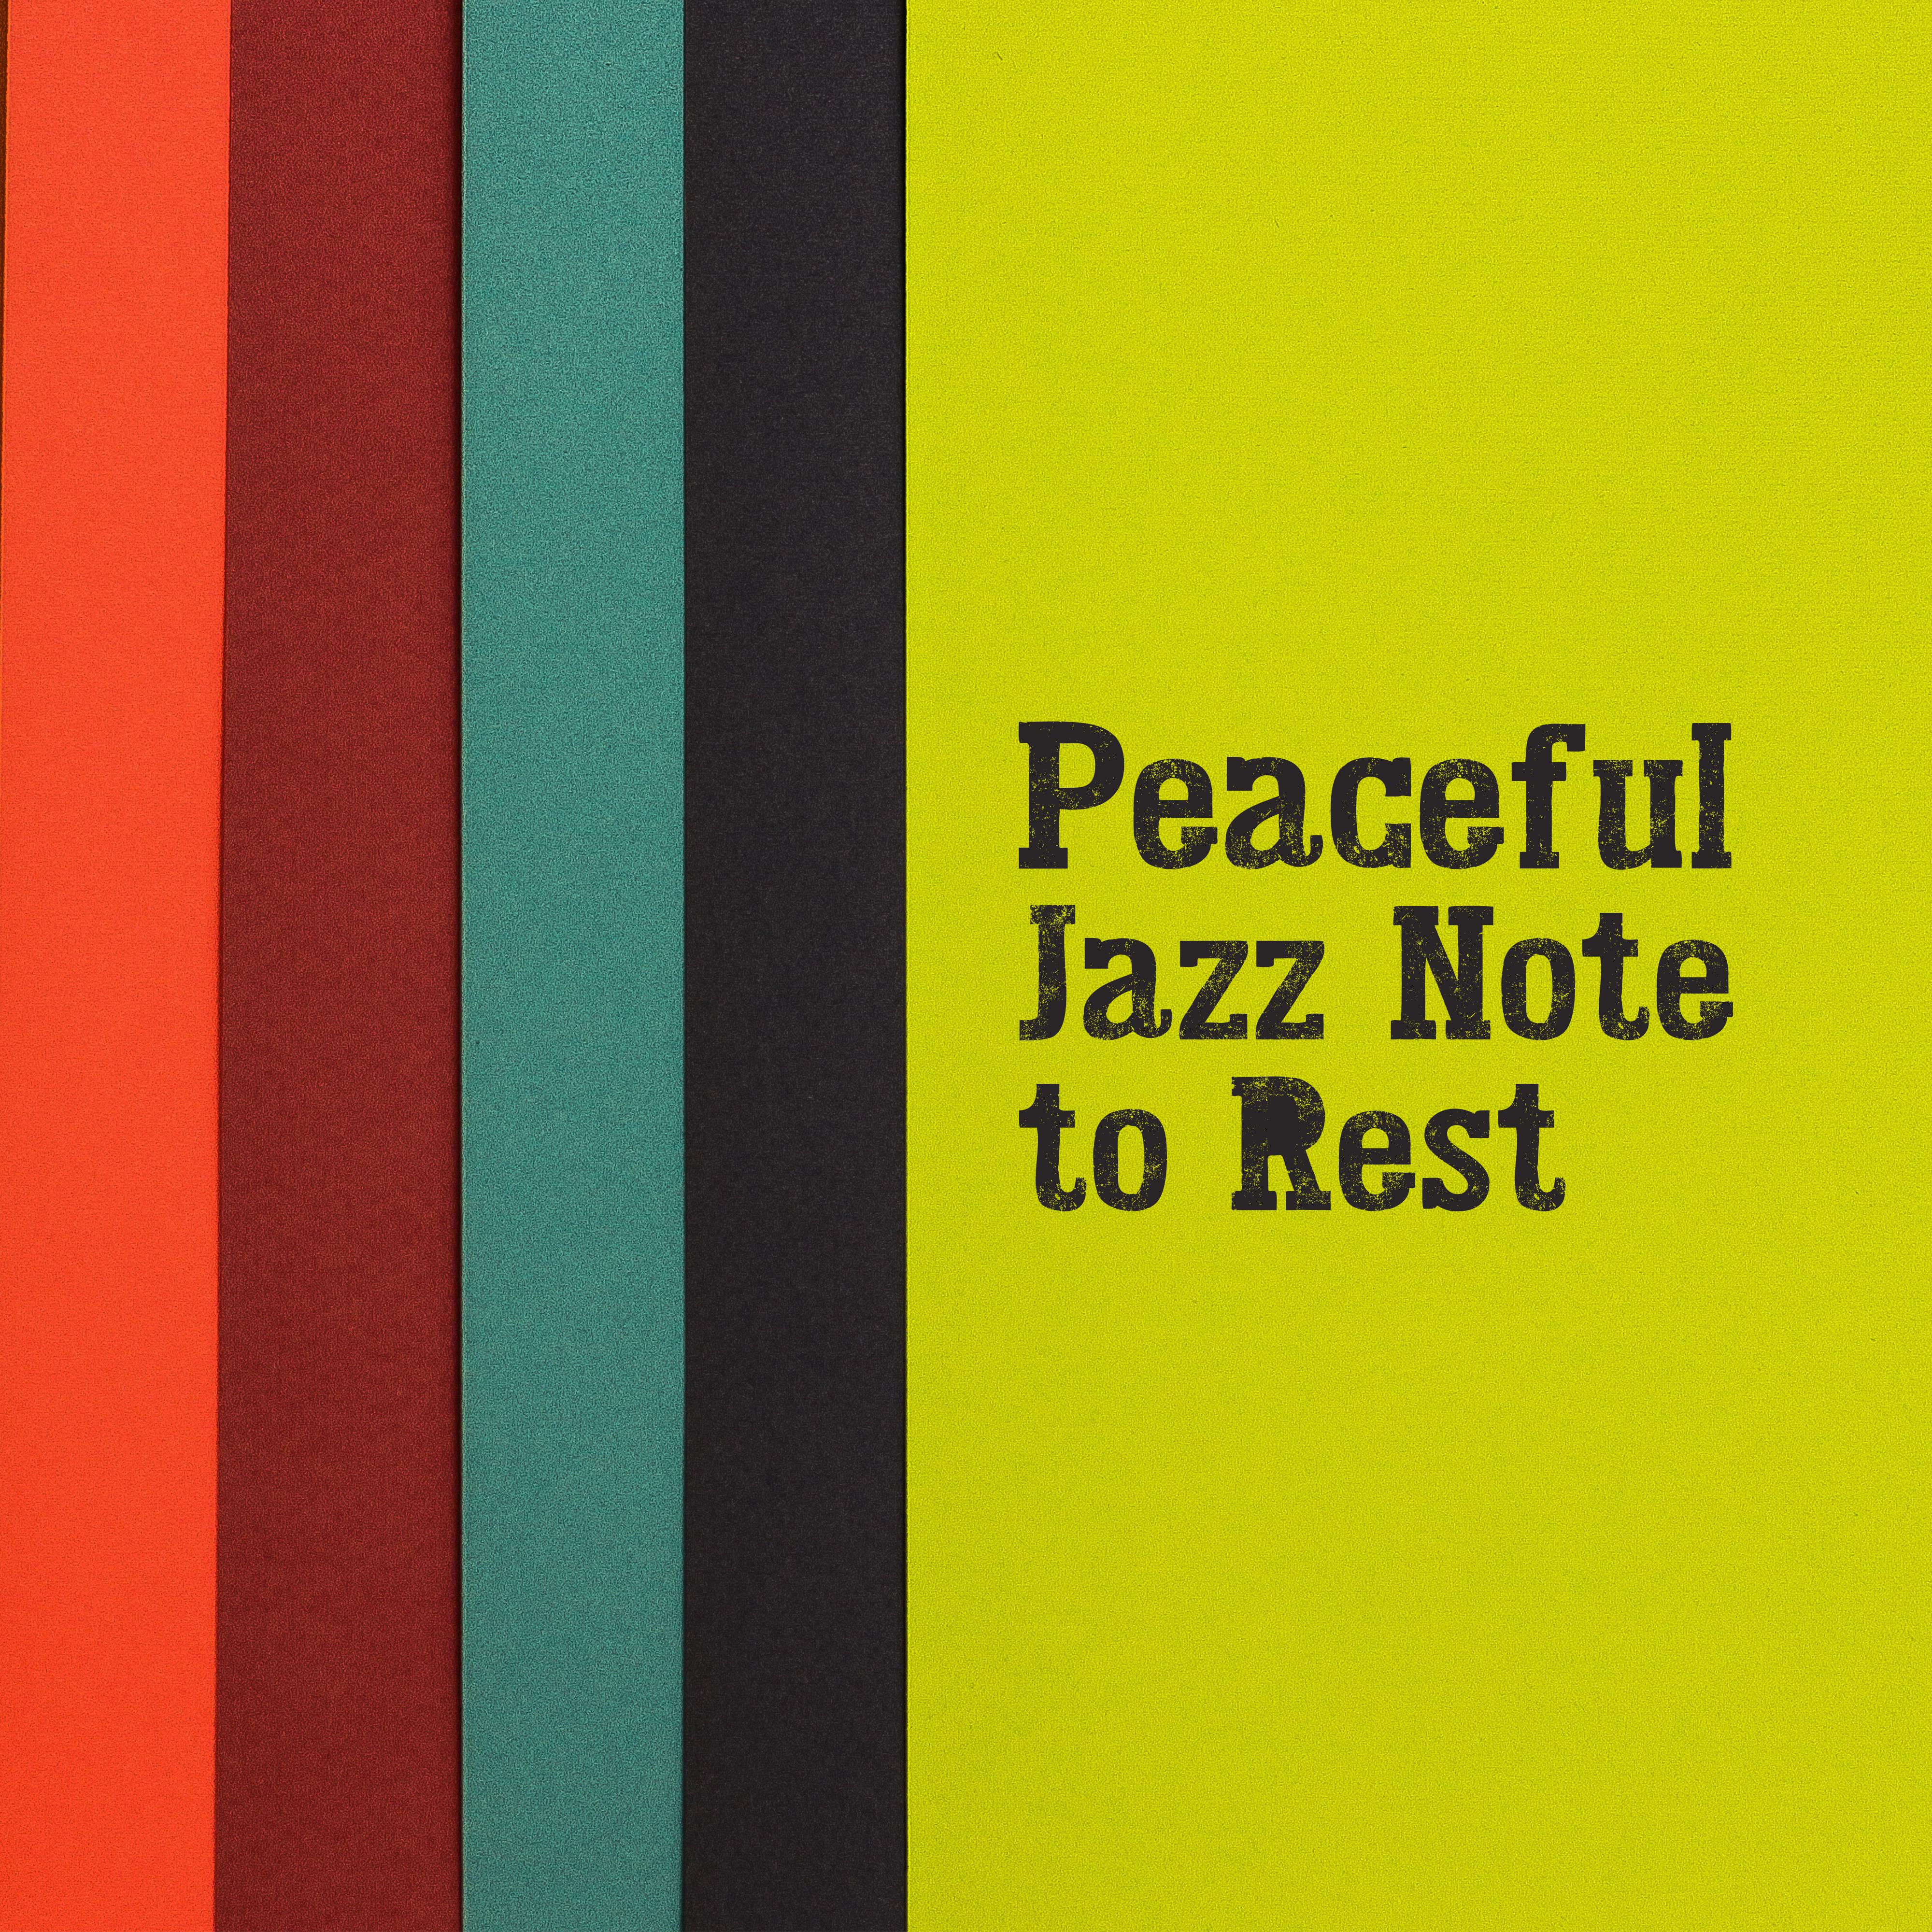 Peaceful Jazz Note to Rest